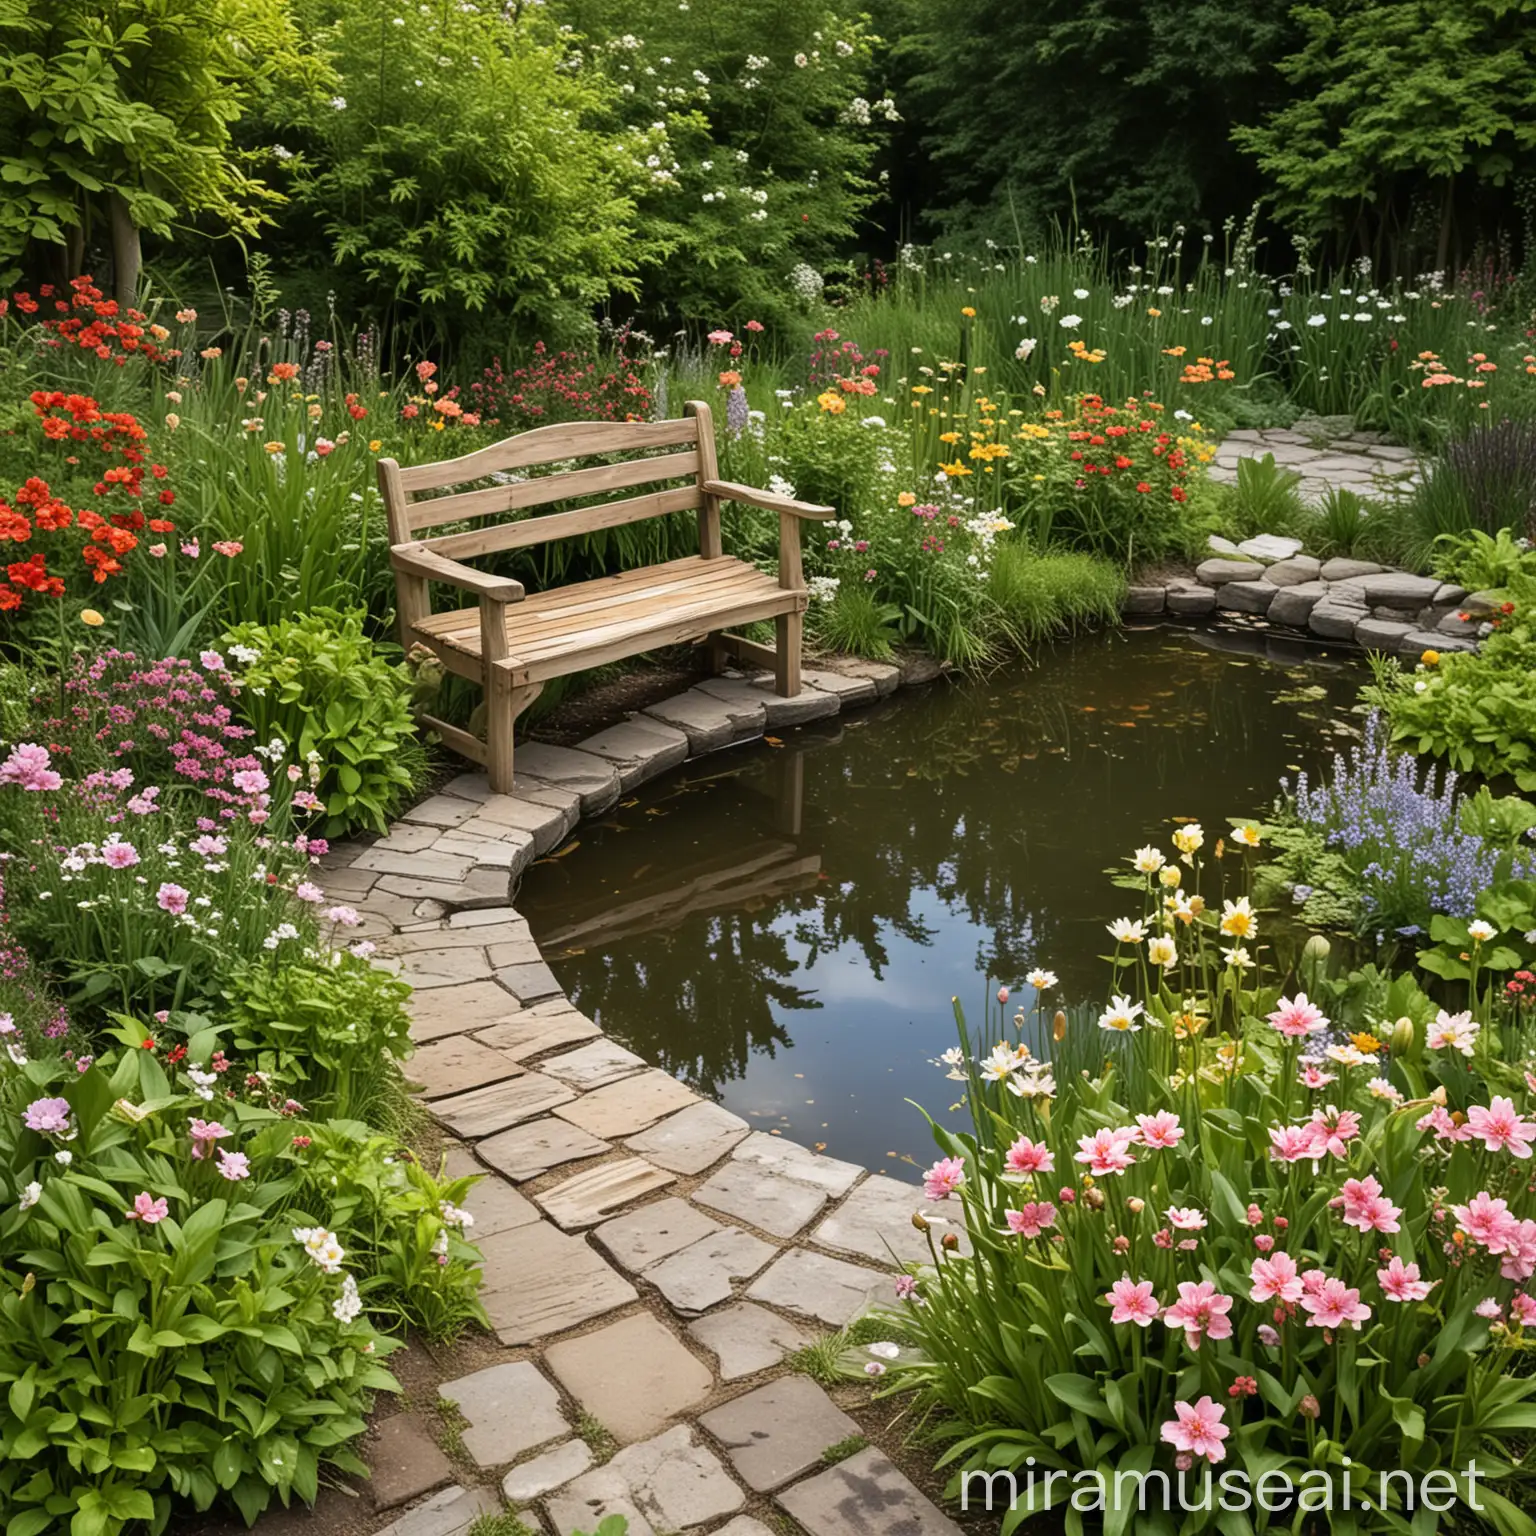 Tranquil Garden Scene with Wooden Bench and Blooming Flowers